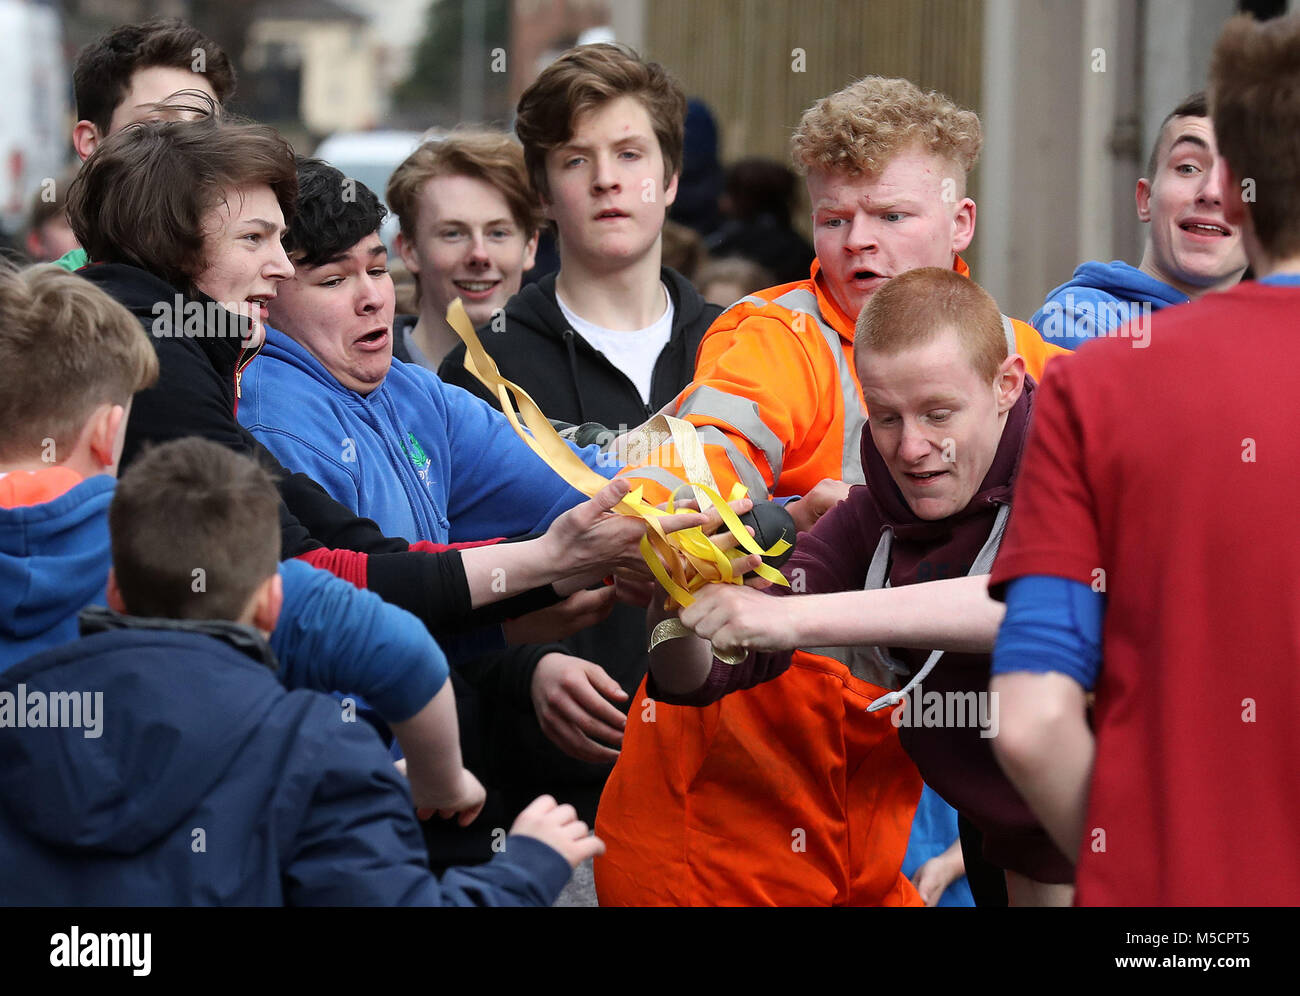 Boys tussle for the leather ball during the annual 'Fastern Eve Handba' event on Jedburgh's High Street in the Scottish Borders. The annual event, which started in the 1700's, involves two teams, the Uppies (residents from the higher part of Jedburgh) and the Doonies (residents from the lower part of Jedburgh) getting the ball to either the top or bottom of the town. The ball, which is made of leather, stuffed with straw and decorated with ribbons is thrown into the crowd to begin the game. Photo credit should read: Andrew Milligan/PA Wire. Stock Photo